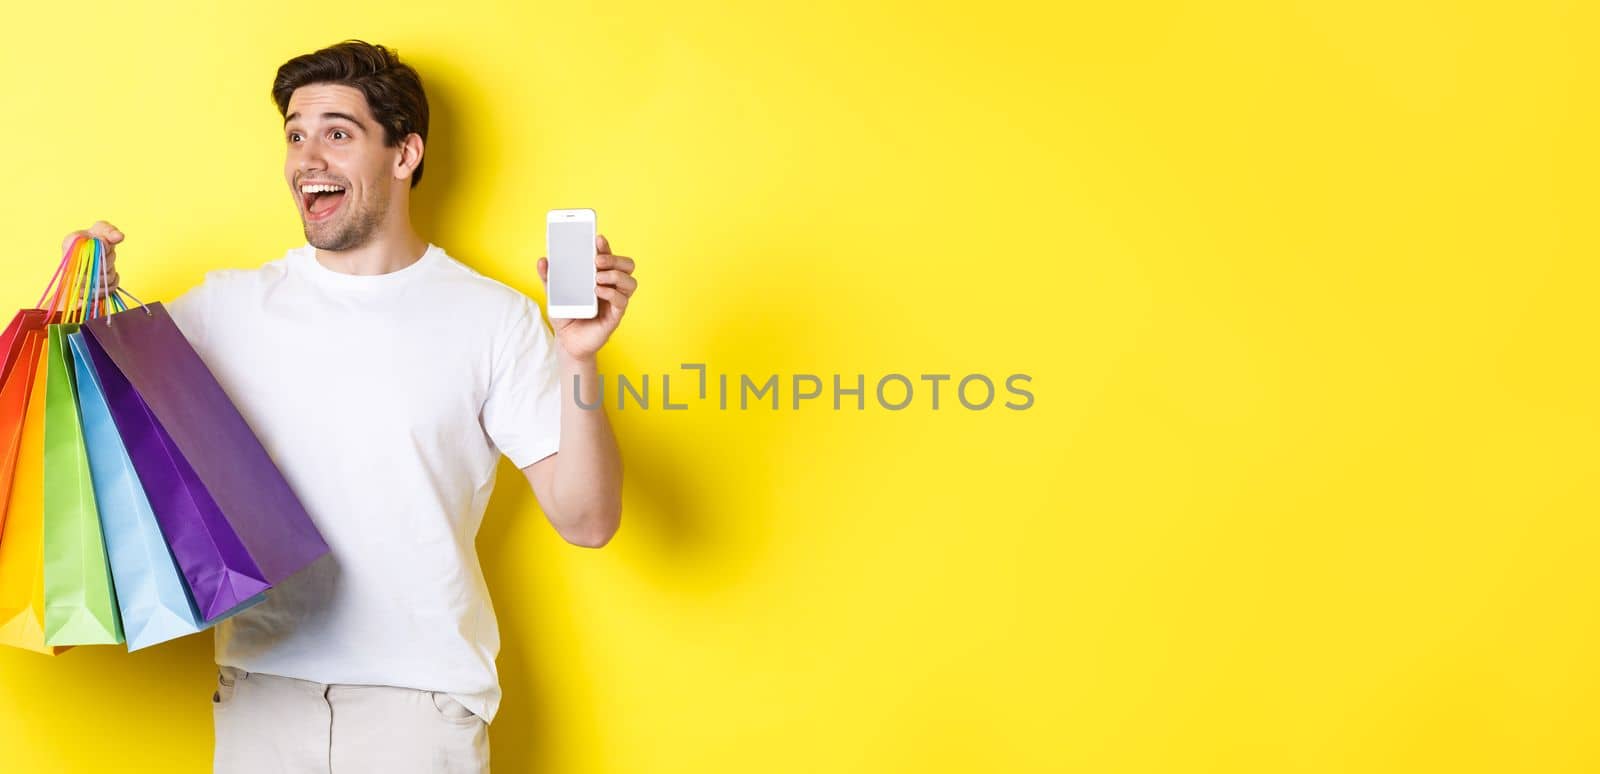 Excited man showing smartphone screen and shopping bags, achieve app goal, demonstrating mobile banking application, yellow background.